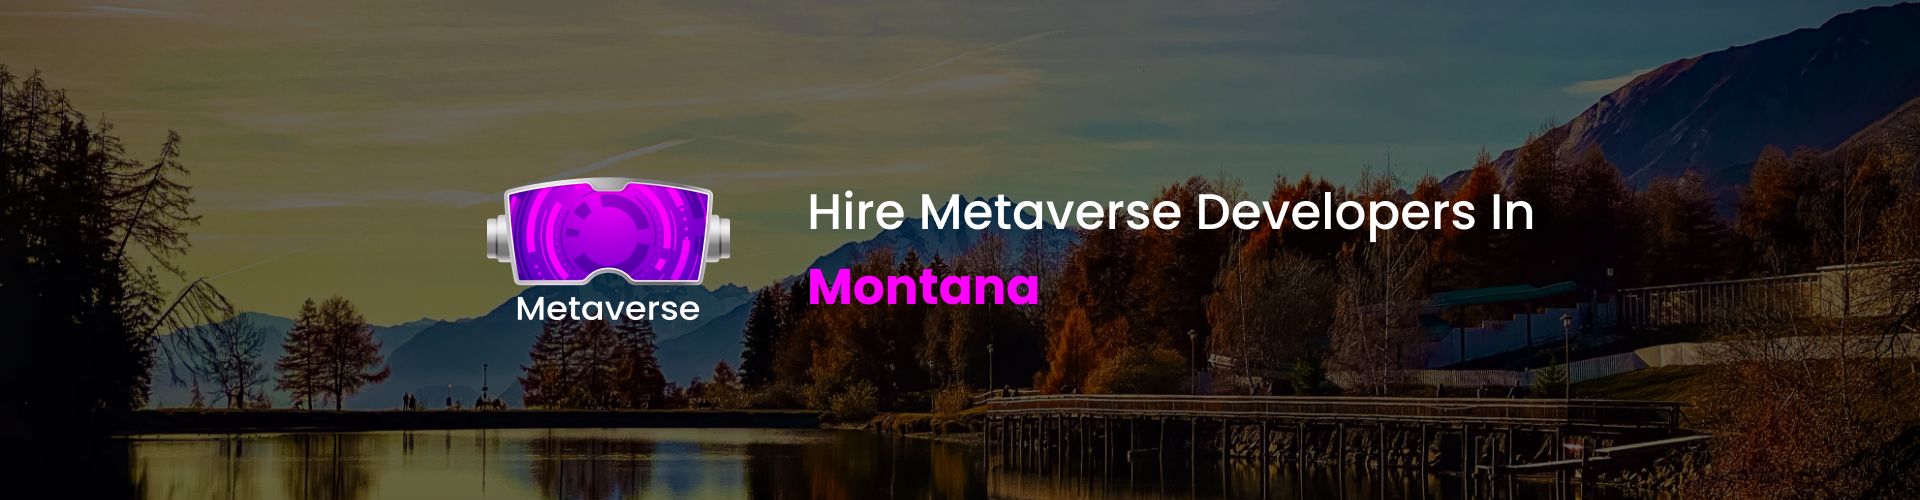 hire metaverse developers in montana